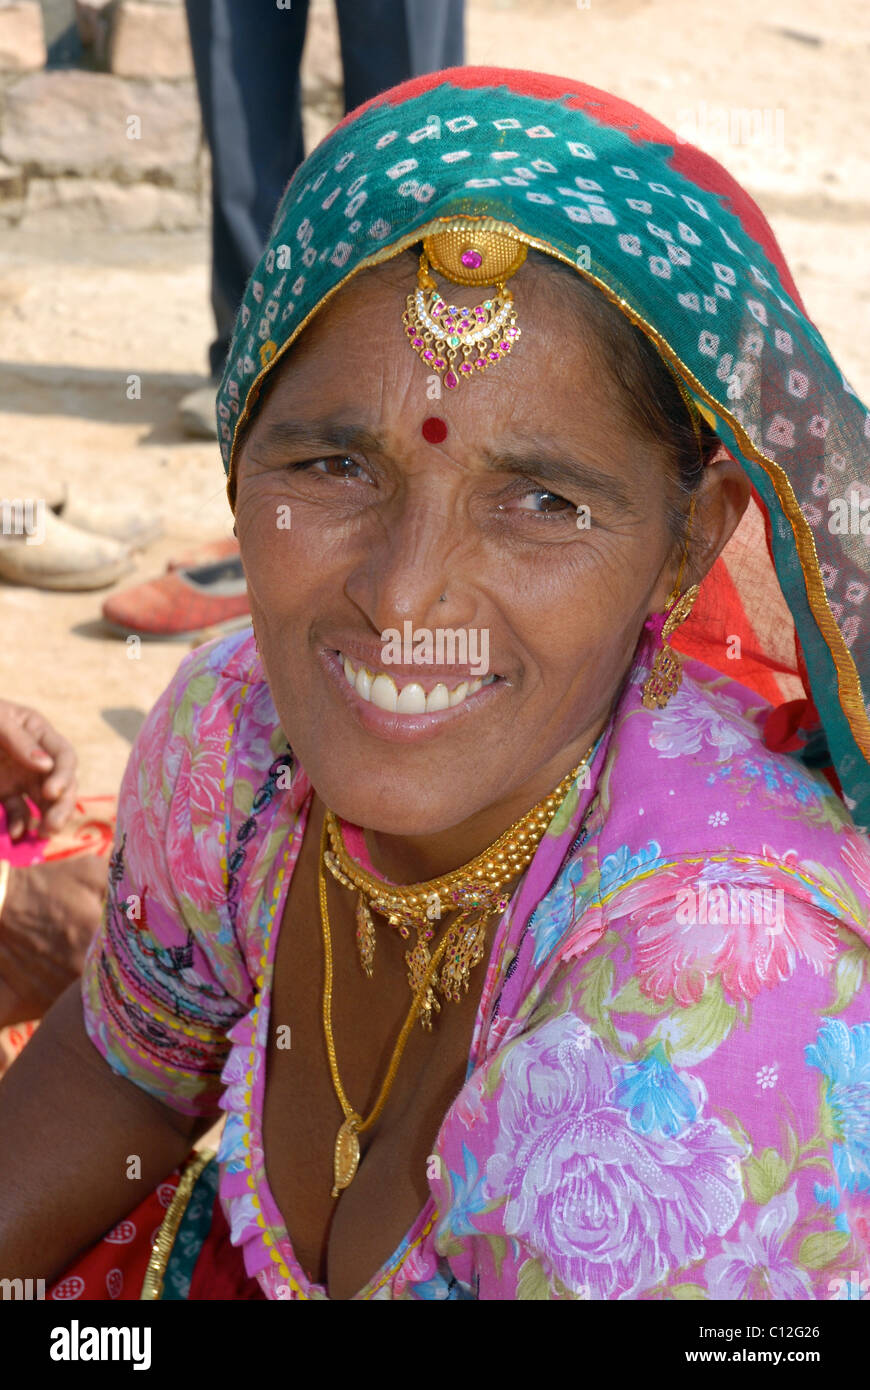 Close up portrait of Indian woman worker in Rajasthan desert wearing tradition dress Stock Photo